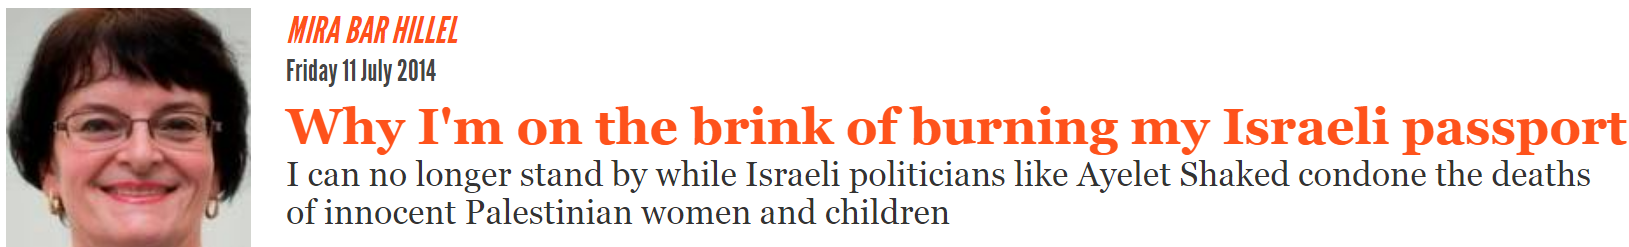 Independent's list of most read articles in 2014 features anti-Jewish columnist